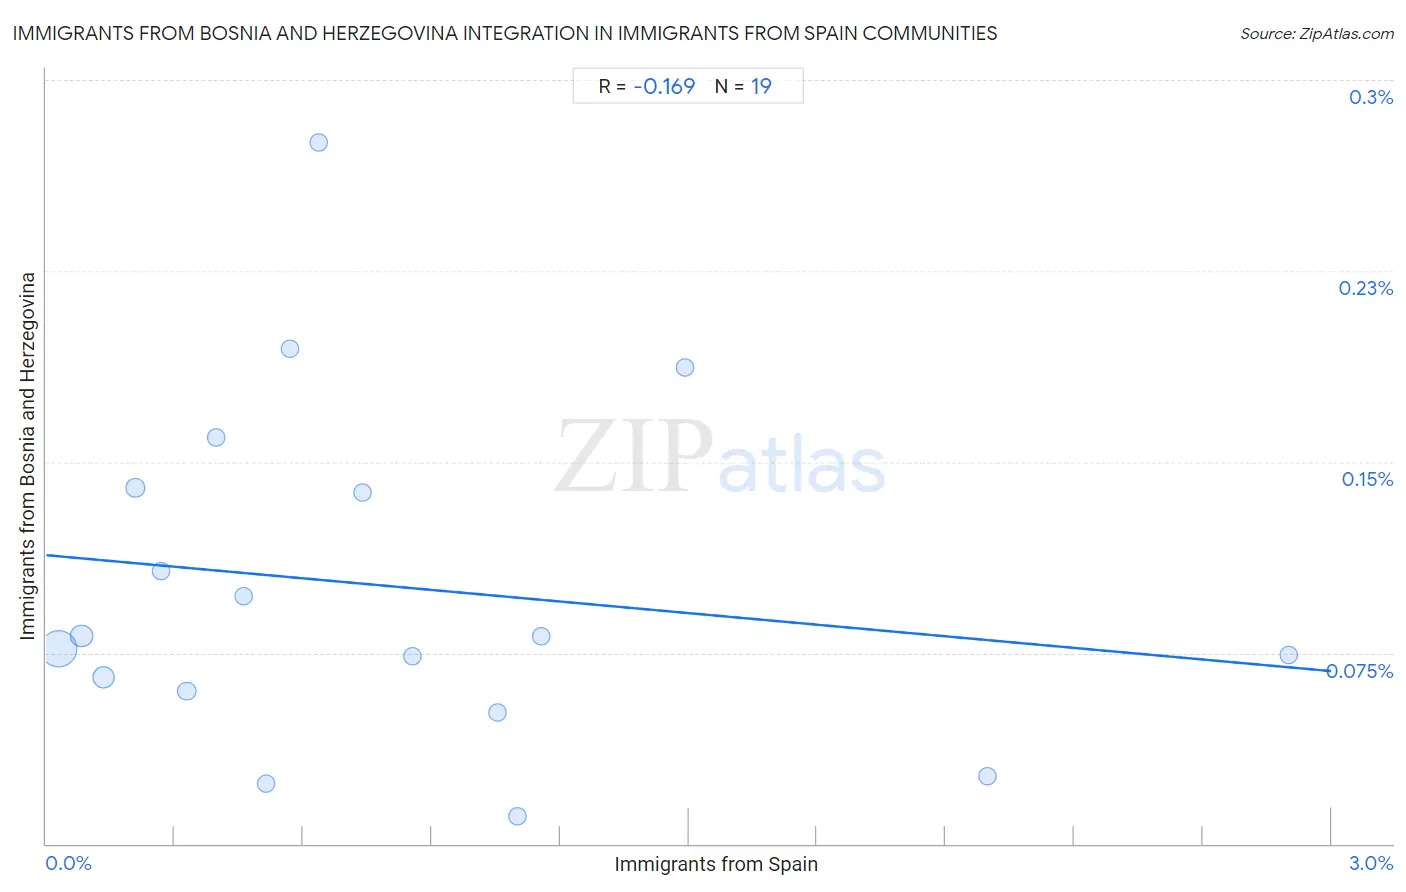 Immigrants from Spain Integration in Immigrants from Bosnia and Herzegovina Communities